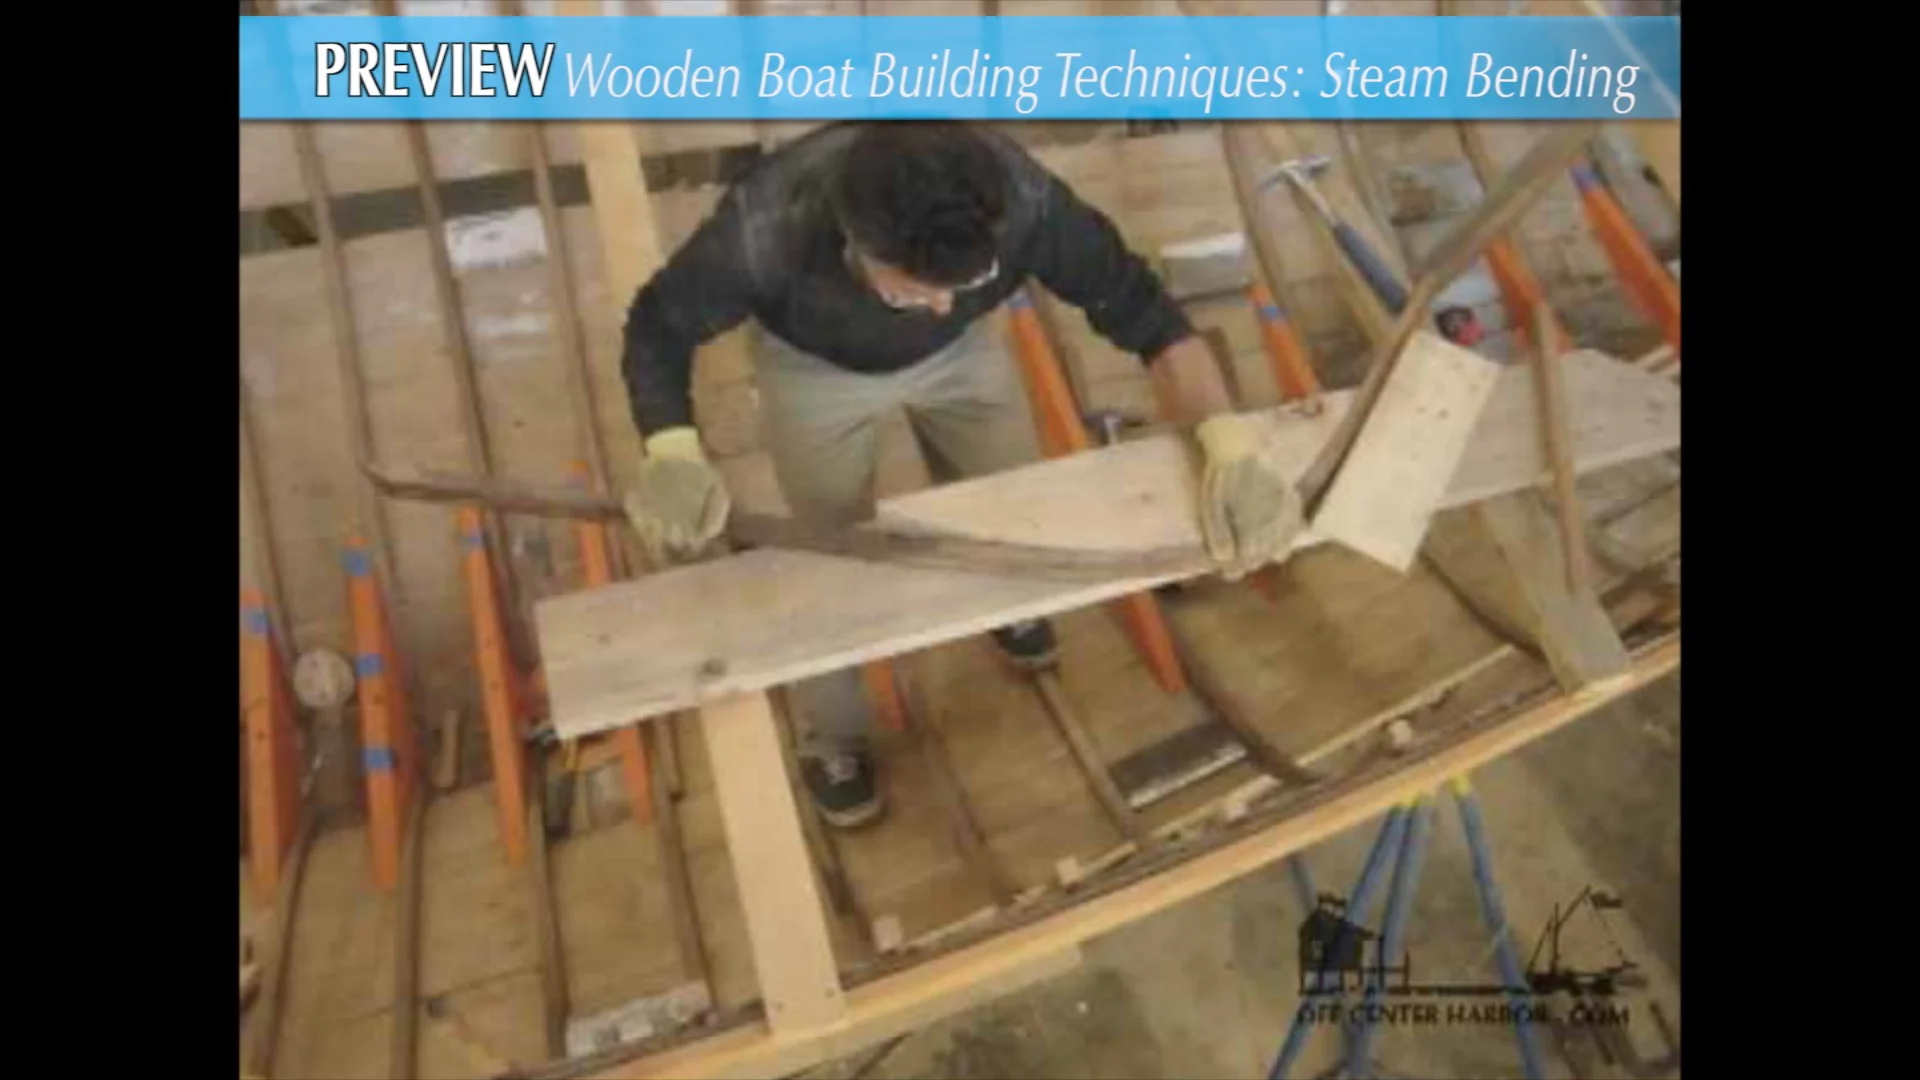 Preview - Boat Building Hand Tools, The Basic Tool Kit - with Harry Bryan  on Vimeo